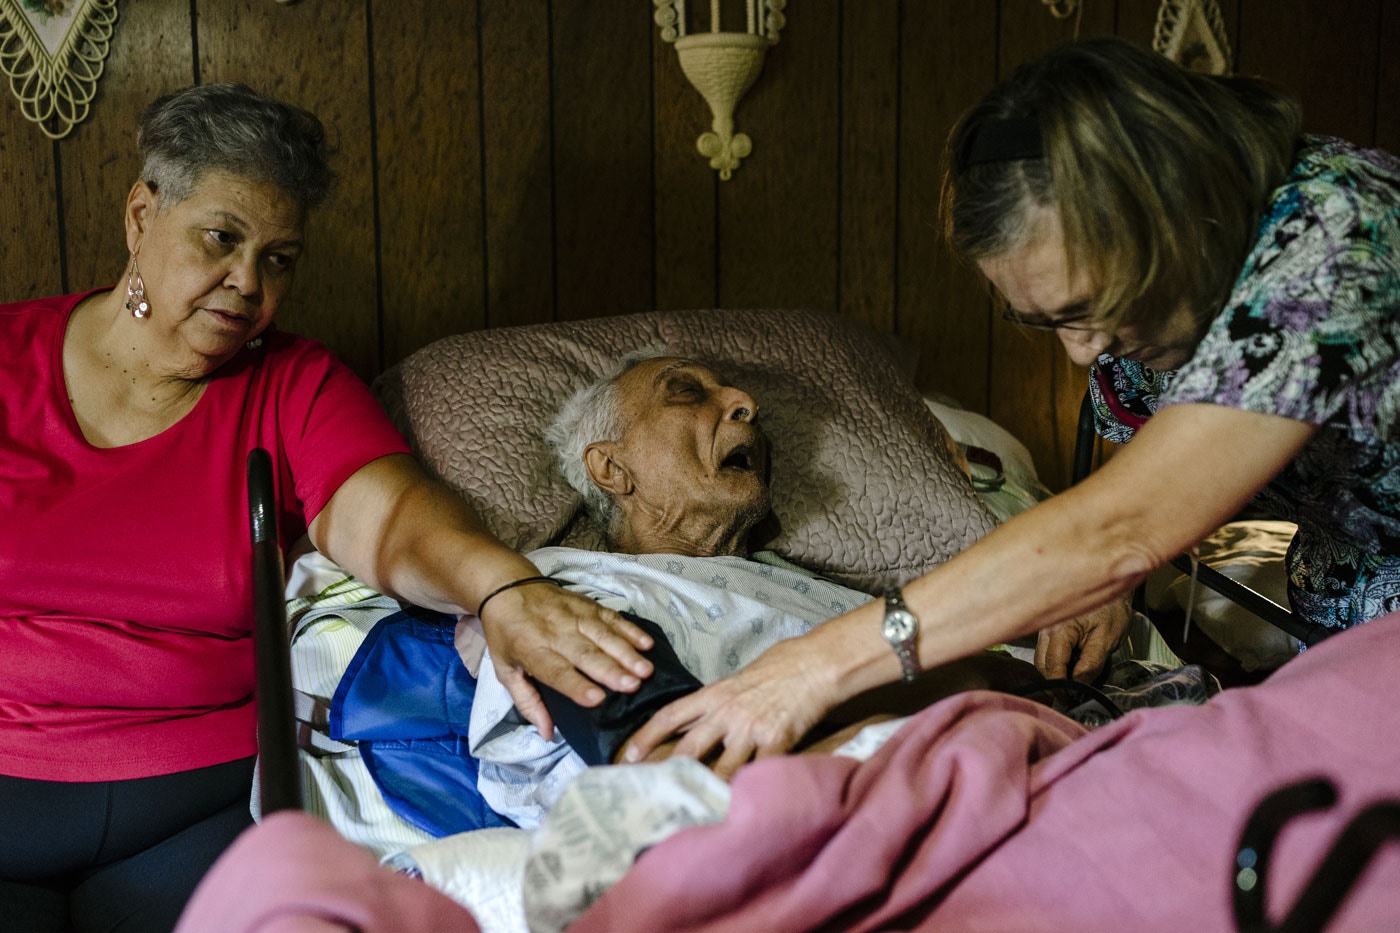 Judy Montgomery (L), 65, sits next to her father, Vallery Montgomery, 89, as nurse Laura Bull performs a checkup, Oct. 22, 2015, Westlake, La.